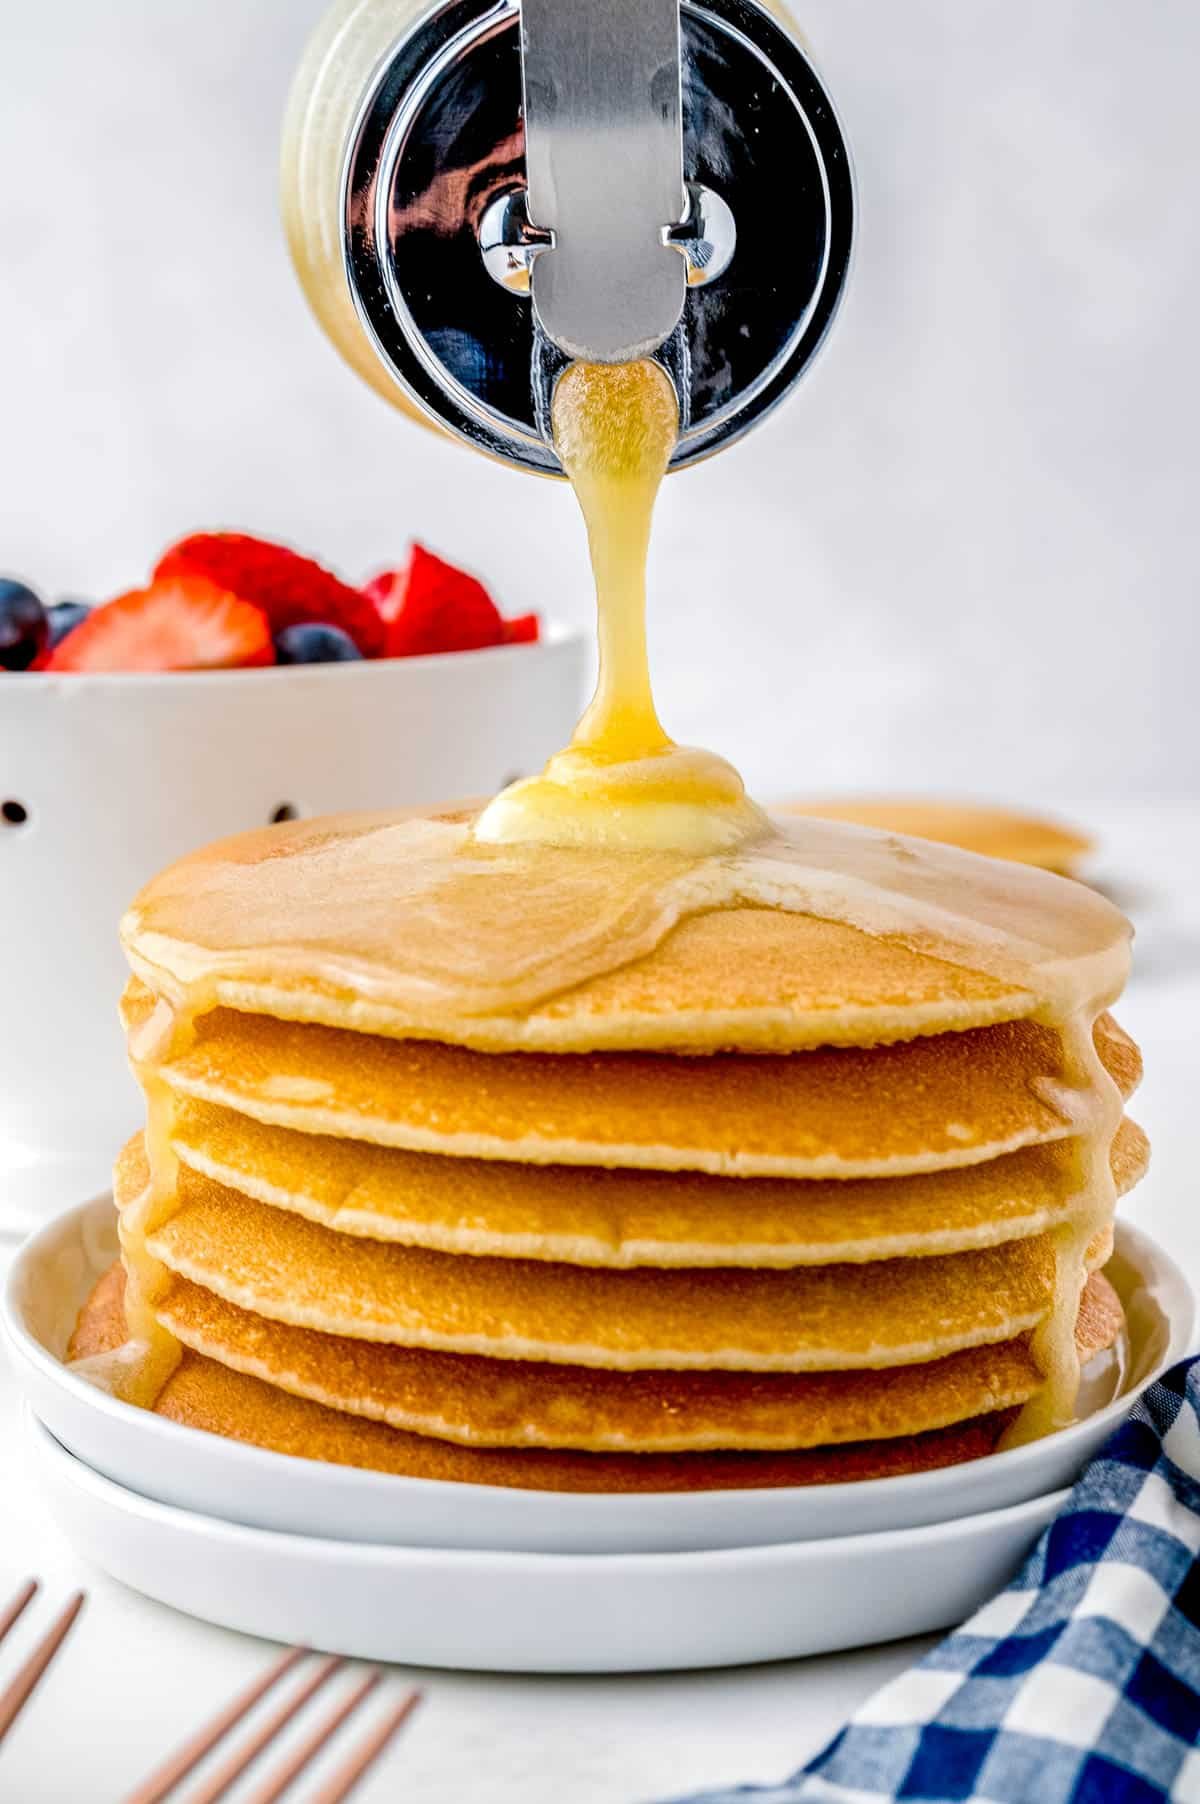 The finished Buttermilk Syrup recipe being poured over a stack of pancakes.